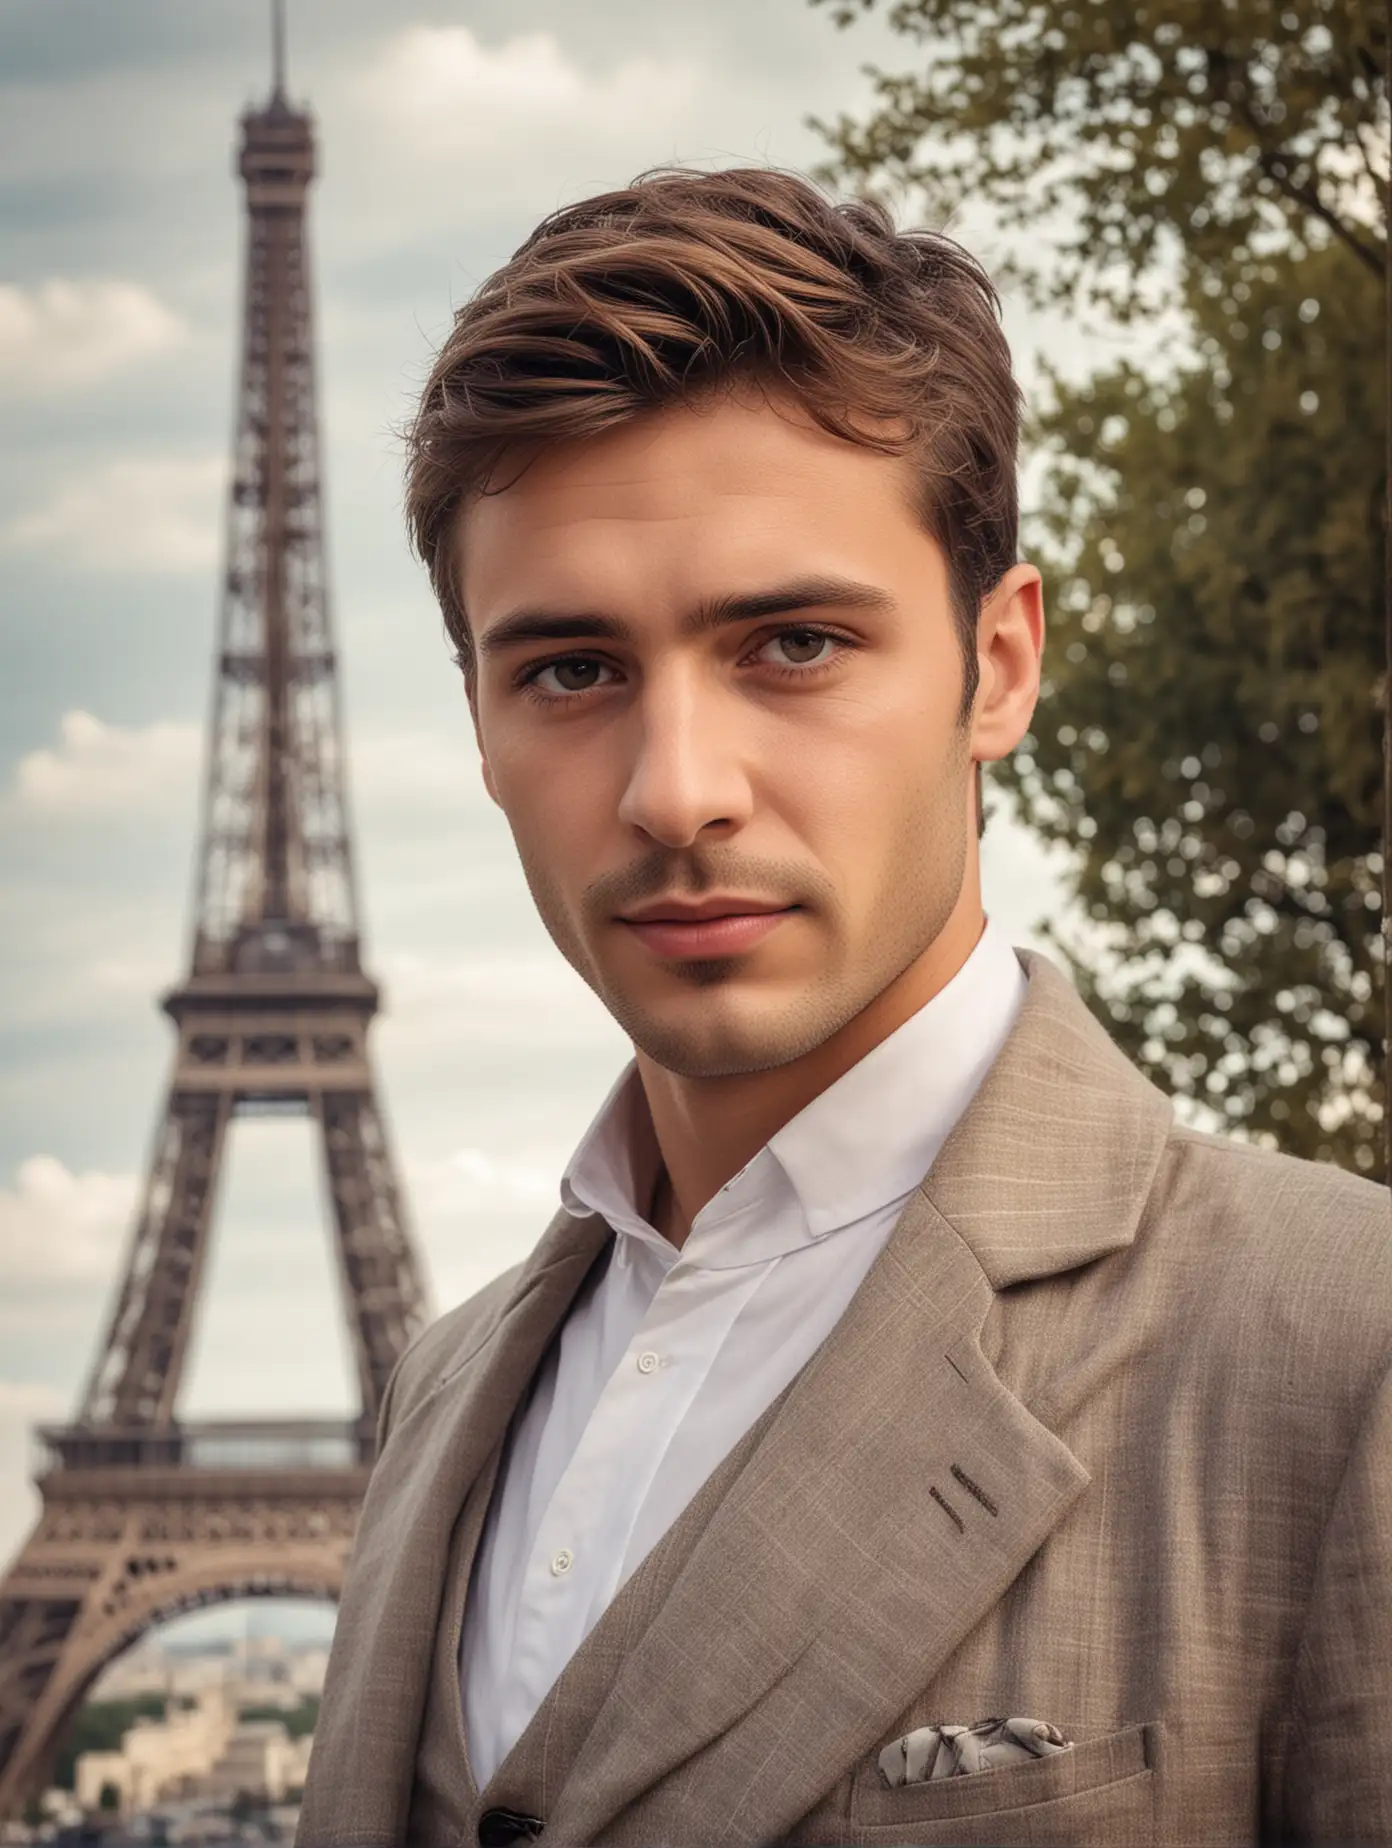 a handsome guy，French，Wearing French clothing， with exquisite facial features, With the Eiffel Tower in the background， professional photography technolog